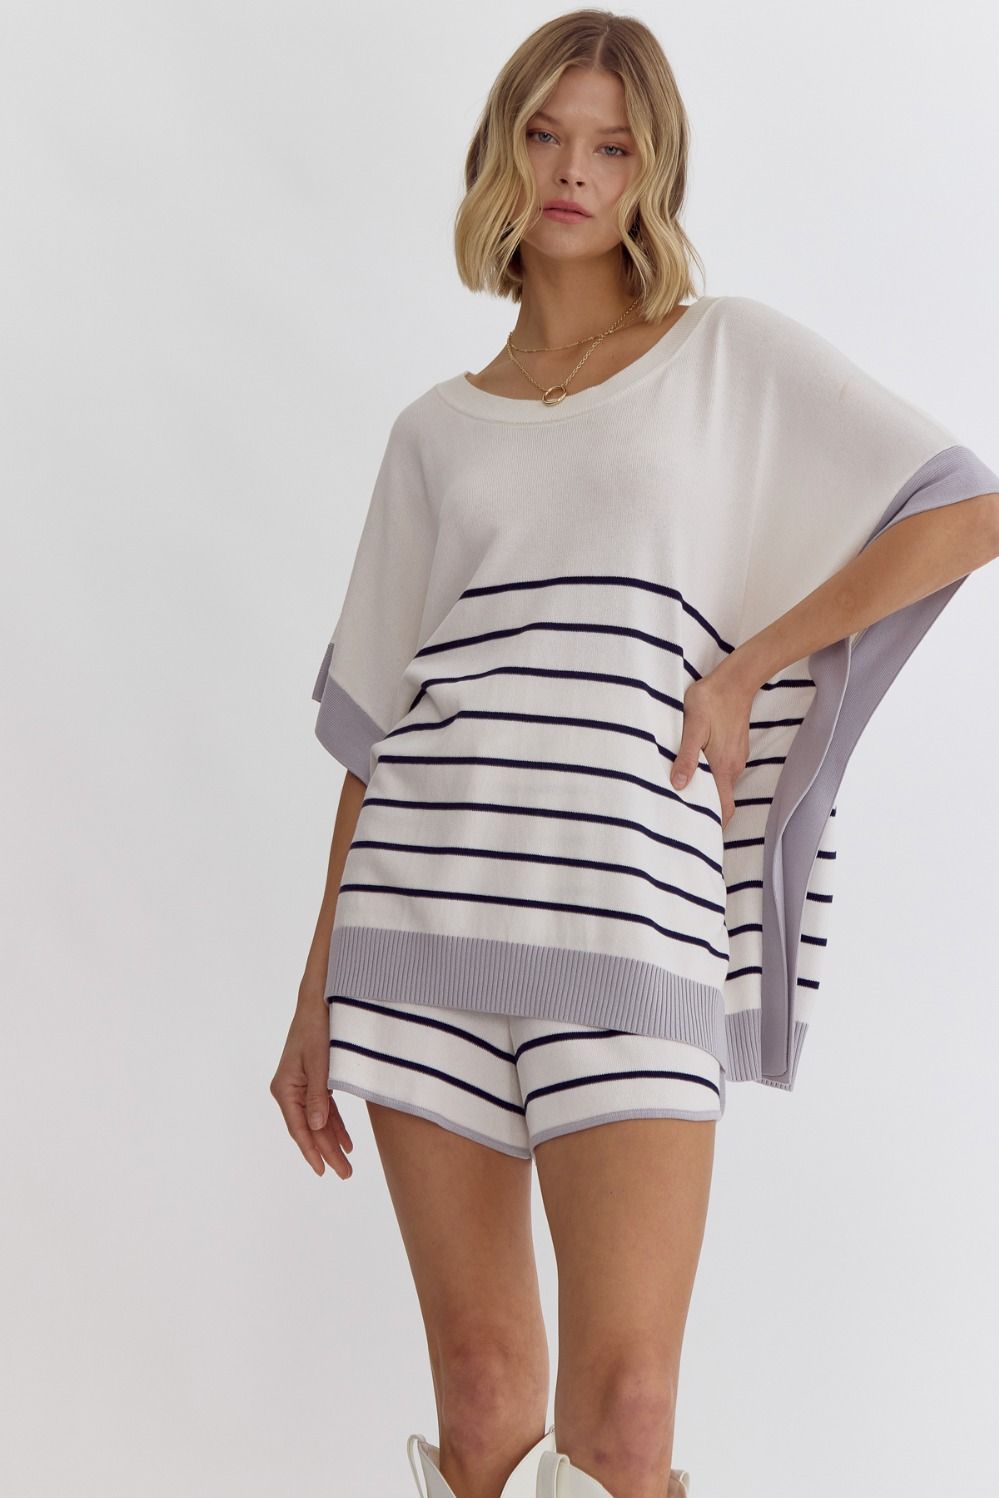 Take on the Waves Top